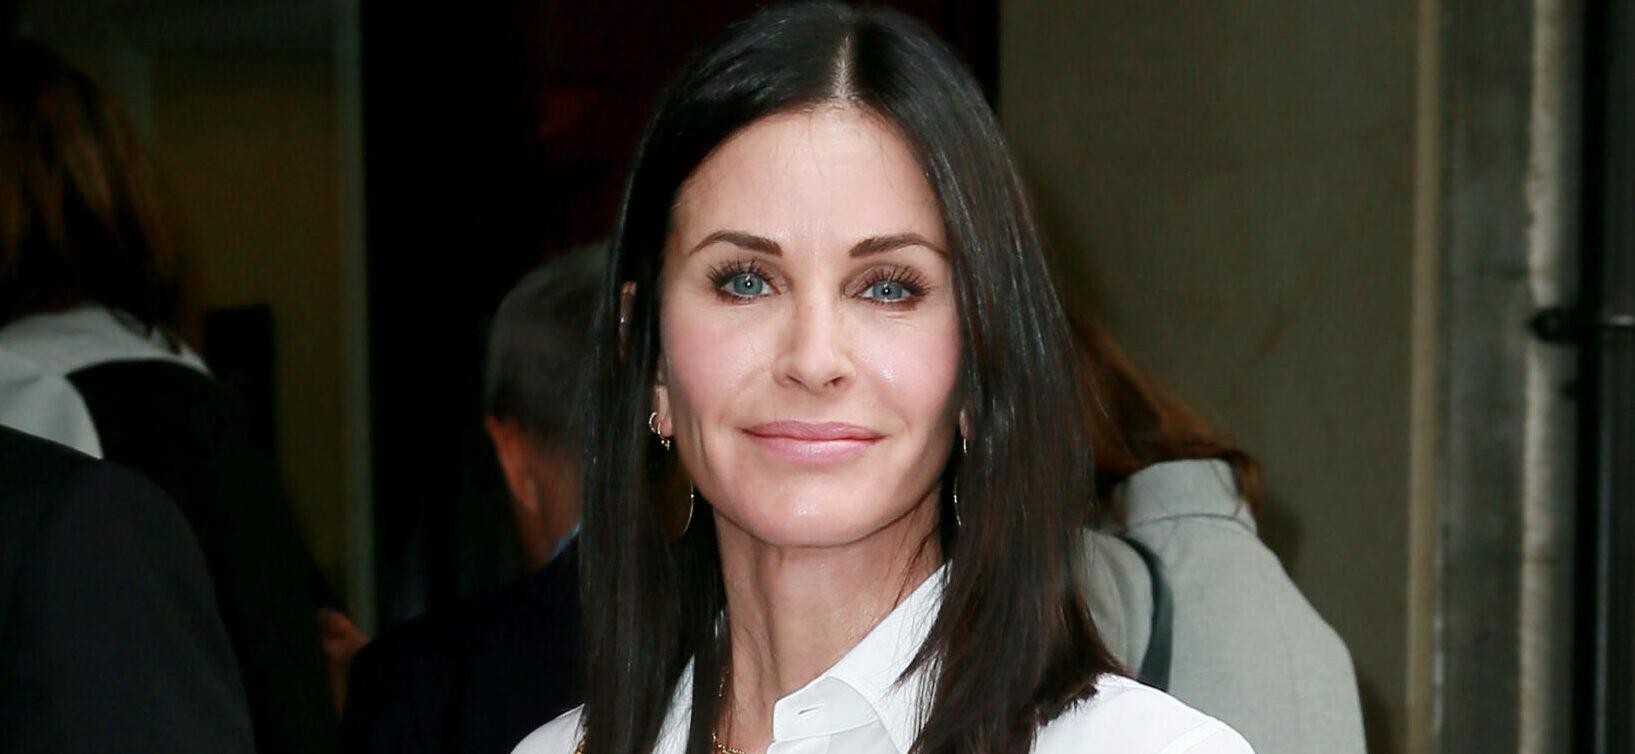 Courteney Cox On Her Experience With Facial Fillers: ‘I Was Able To Reverse Some Of That’